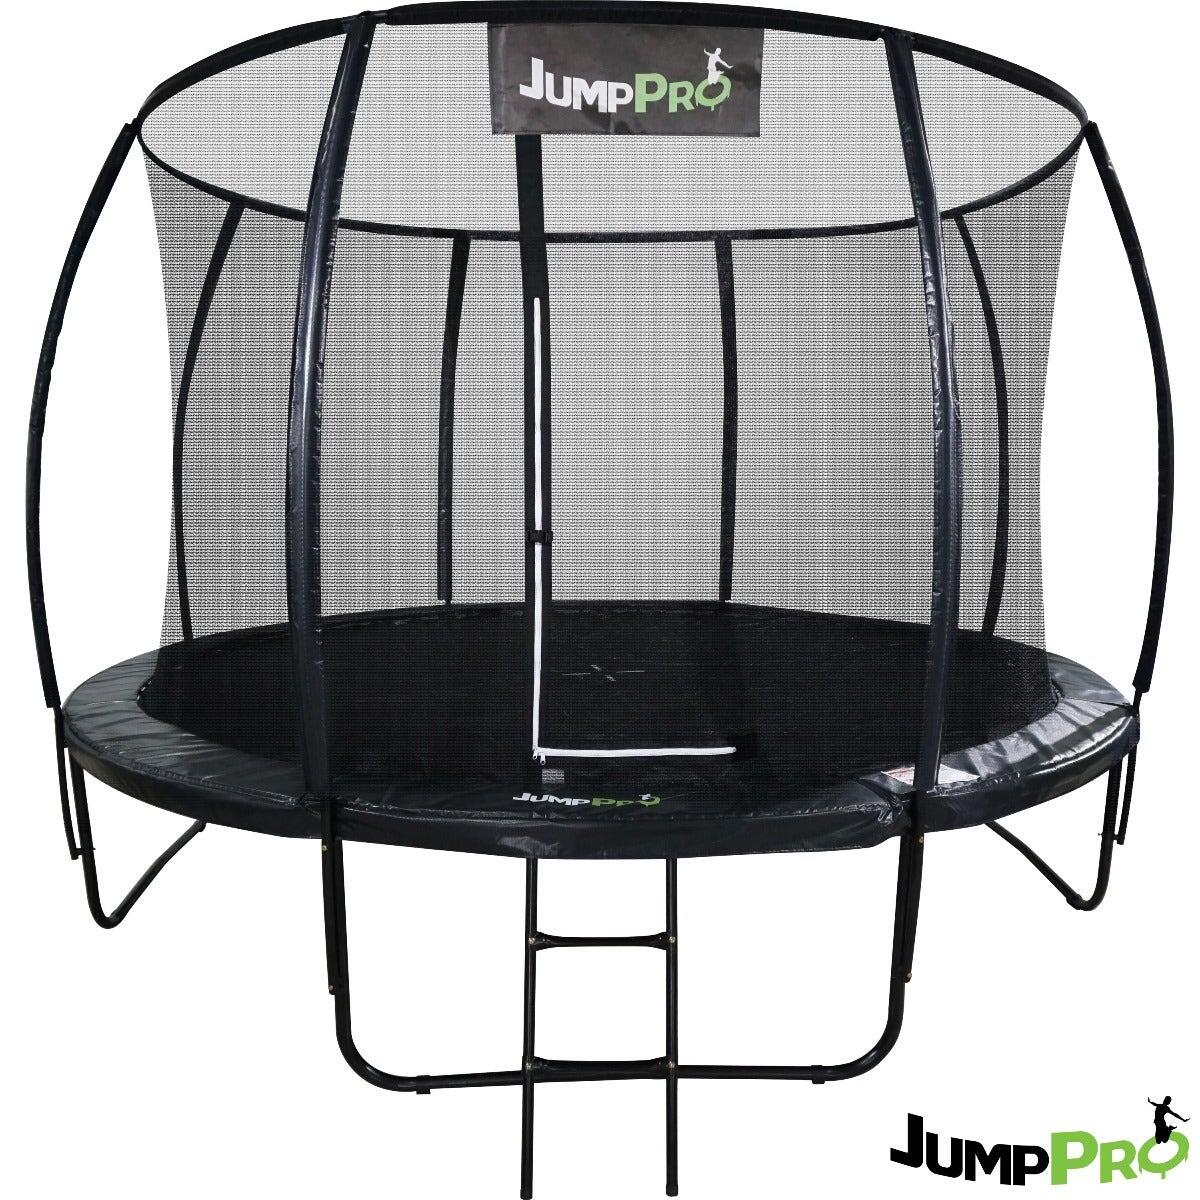 8ft JumpPRO™ Xcel Black Round Trampoline with Enclosure 1/1